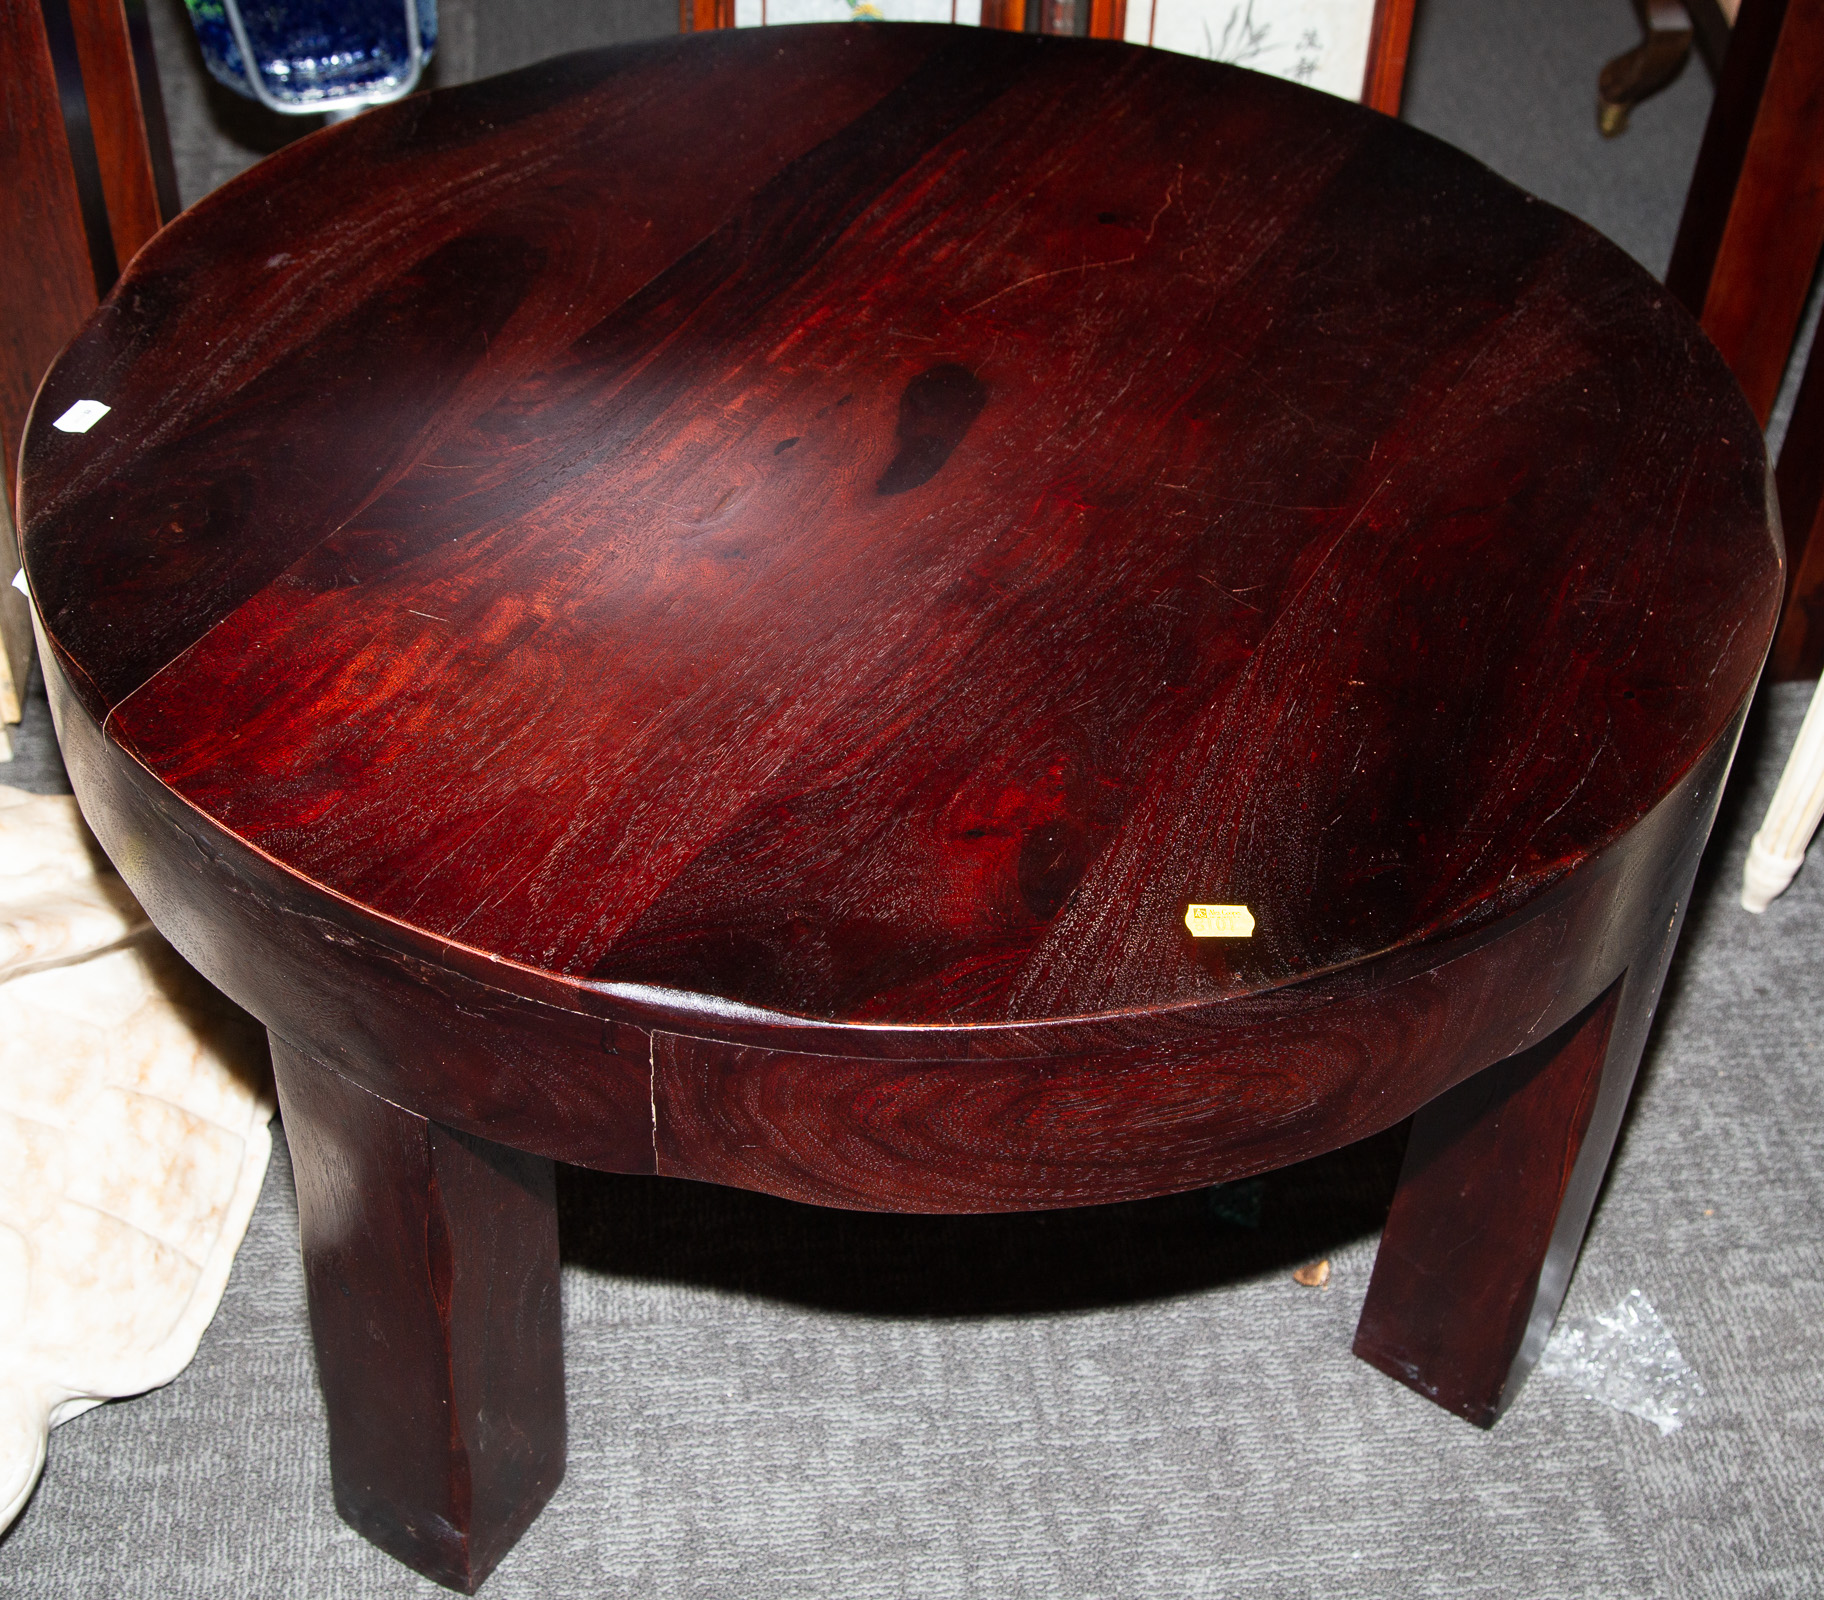 RUSTIC STYLE MAHOGANY ROUND TABLE Contemporary.